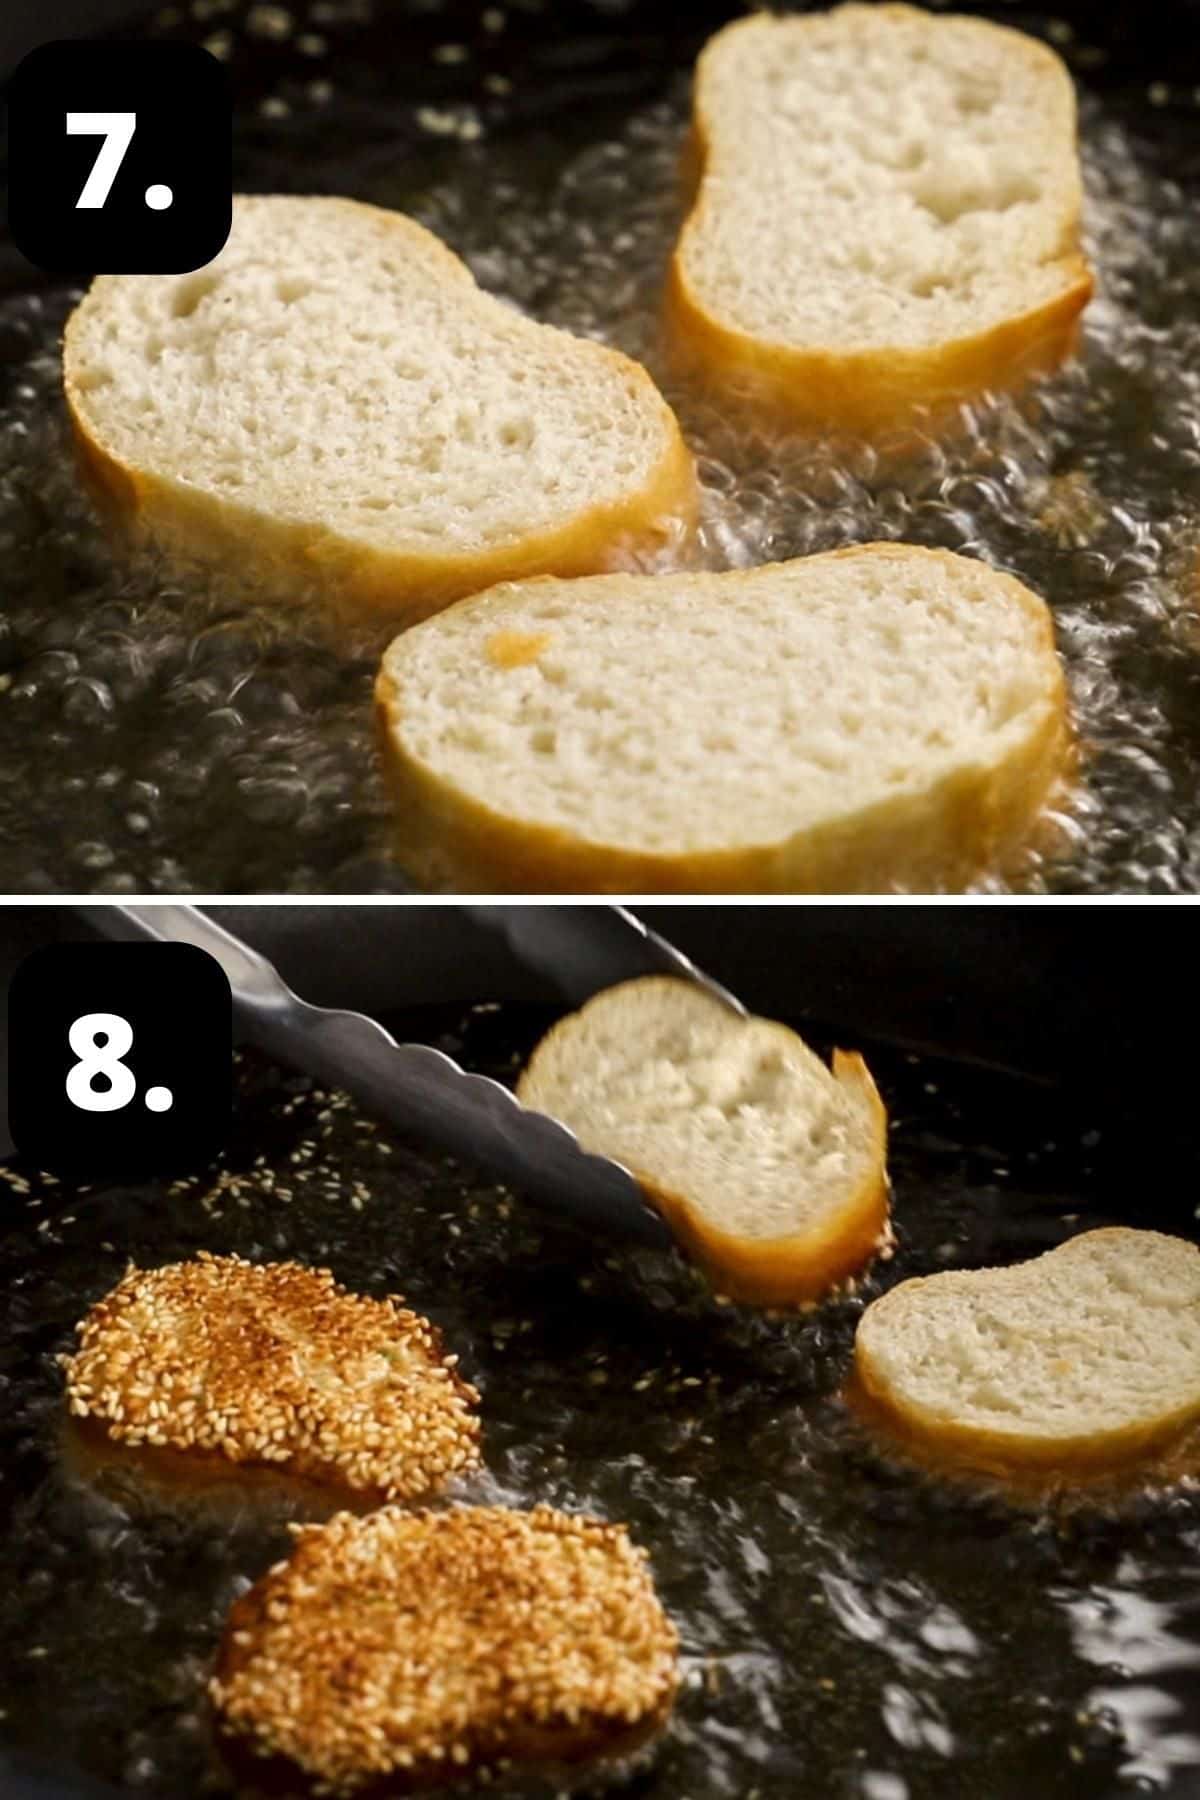 Steps 7-8 of preparing this recipe - frying the tofu toasts sesame seed side down and flipping the toasts to fry the other side.